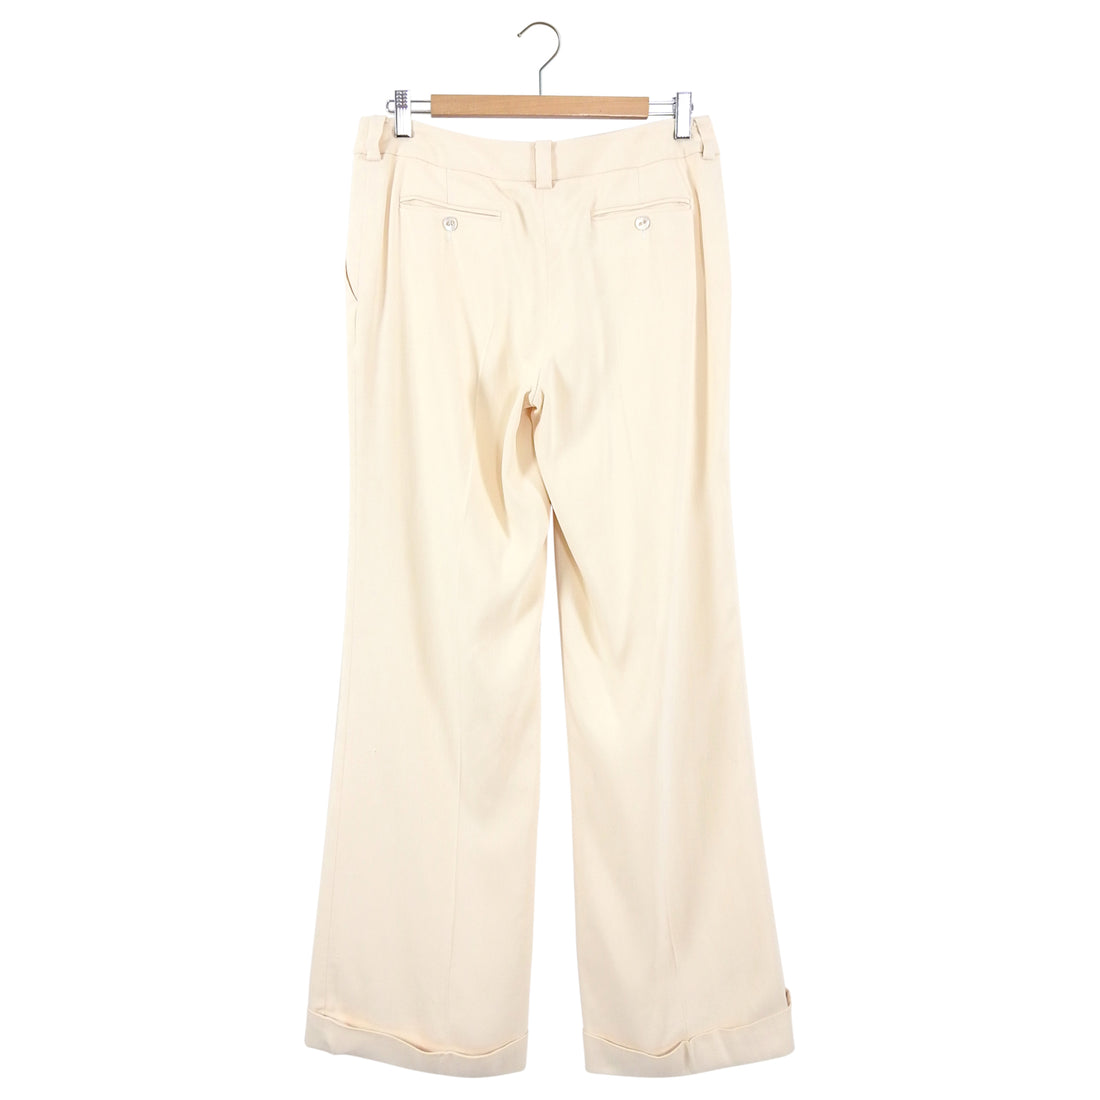 VTG Christian Dior Monsieur 40 x 36 USA Tailored Relaxed Beige Pants  Trousers